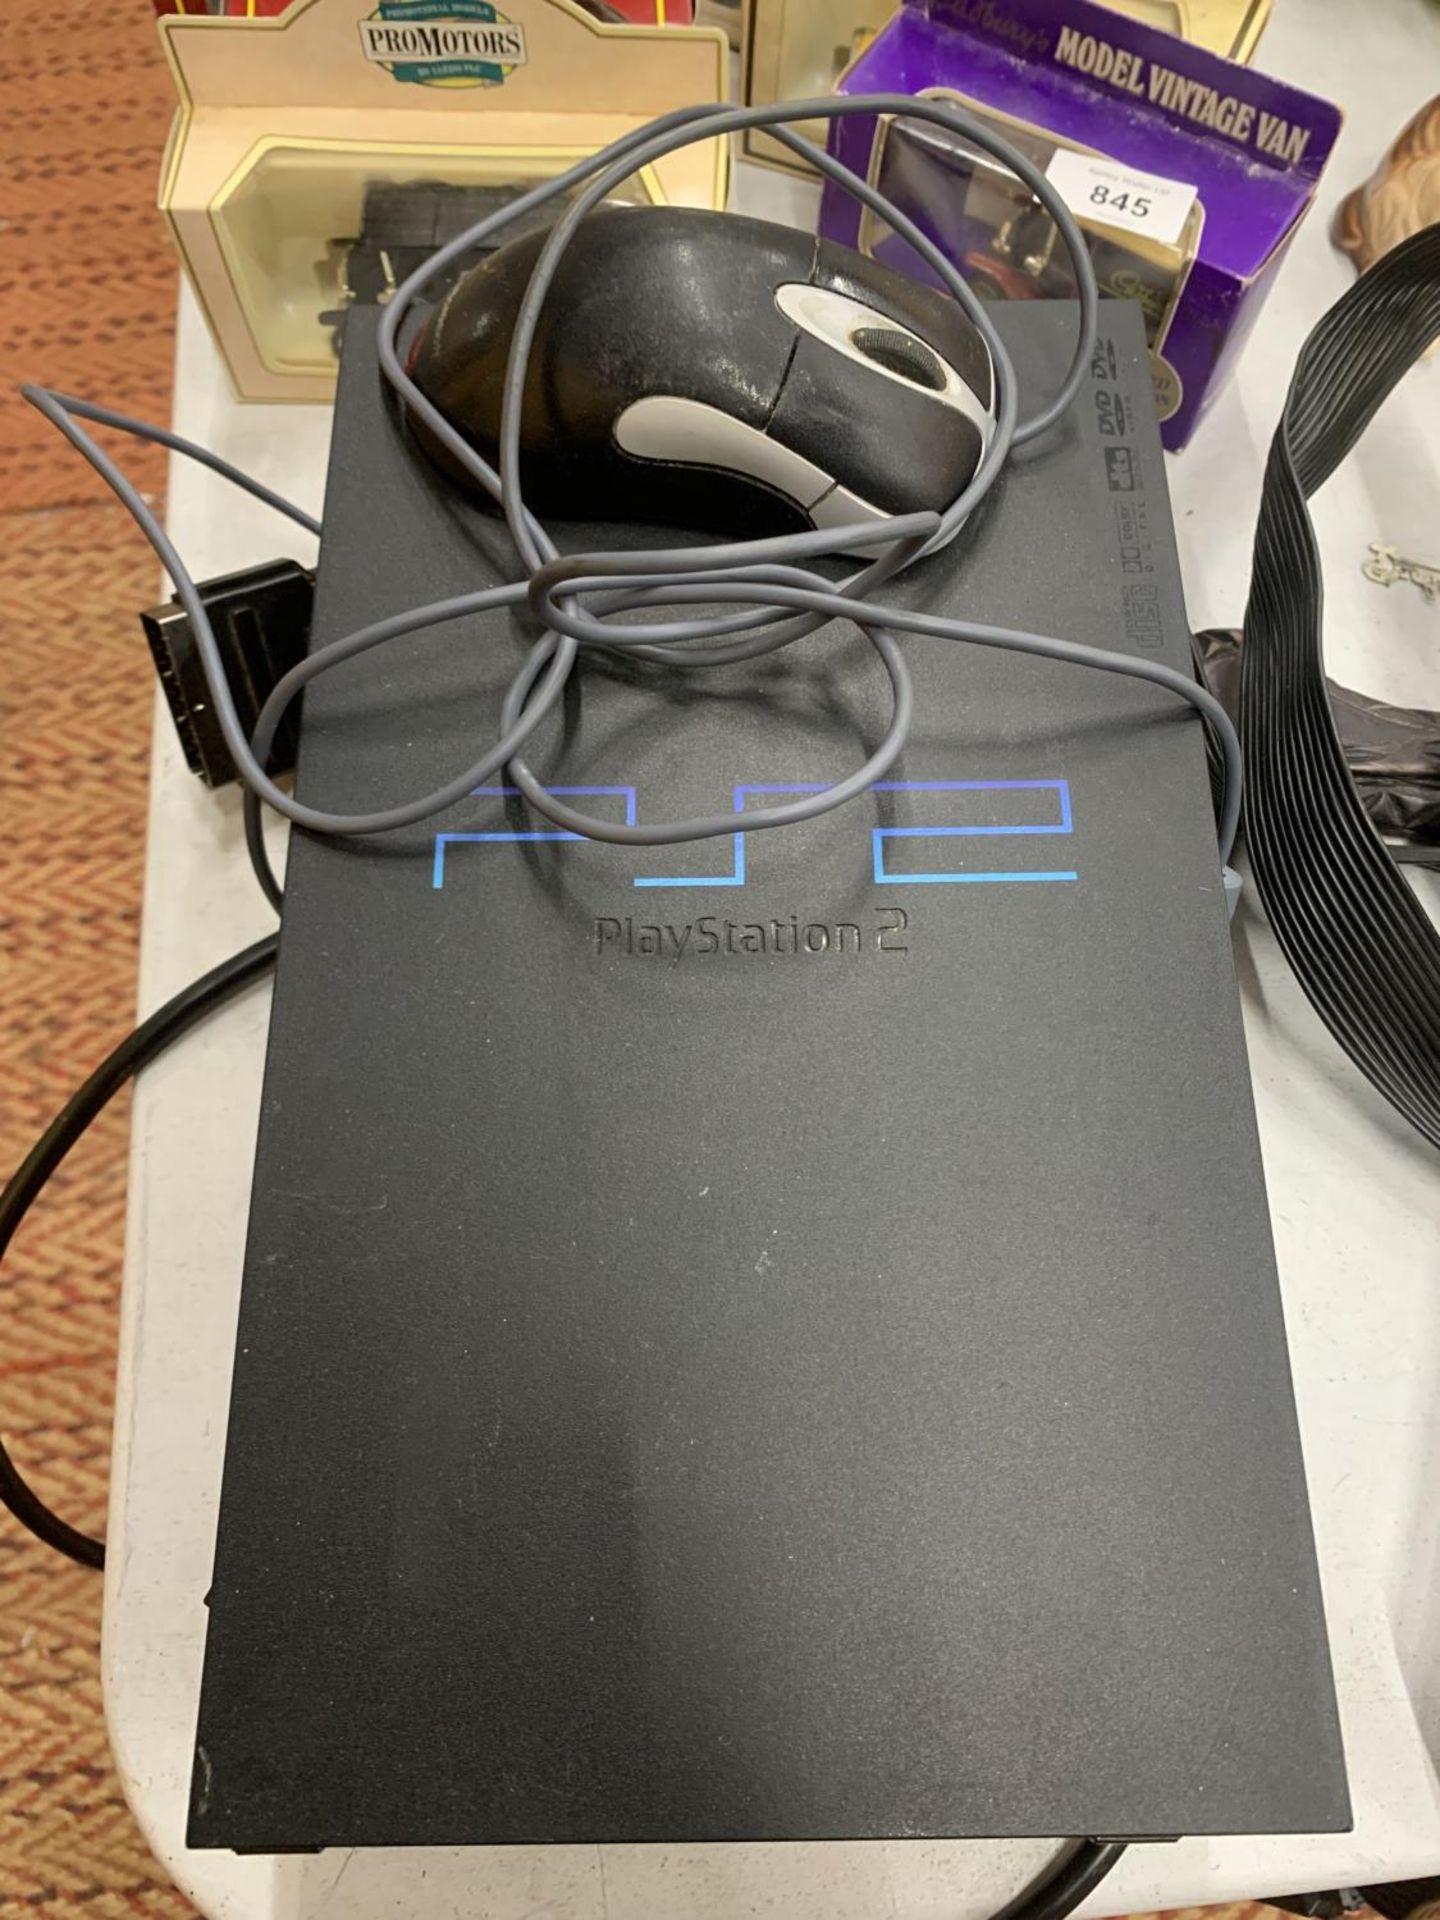 A SONY PLAYSTATION 2 WITH MICROSOFT MOUSE